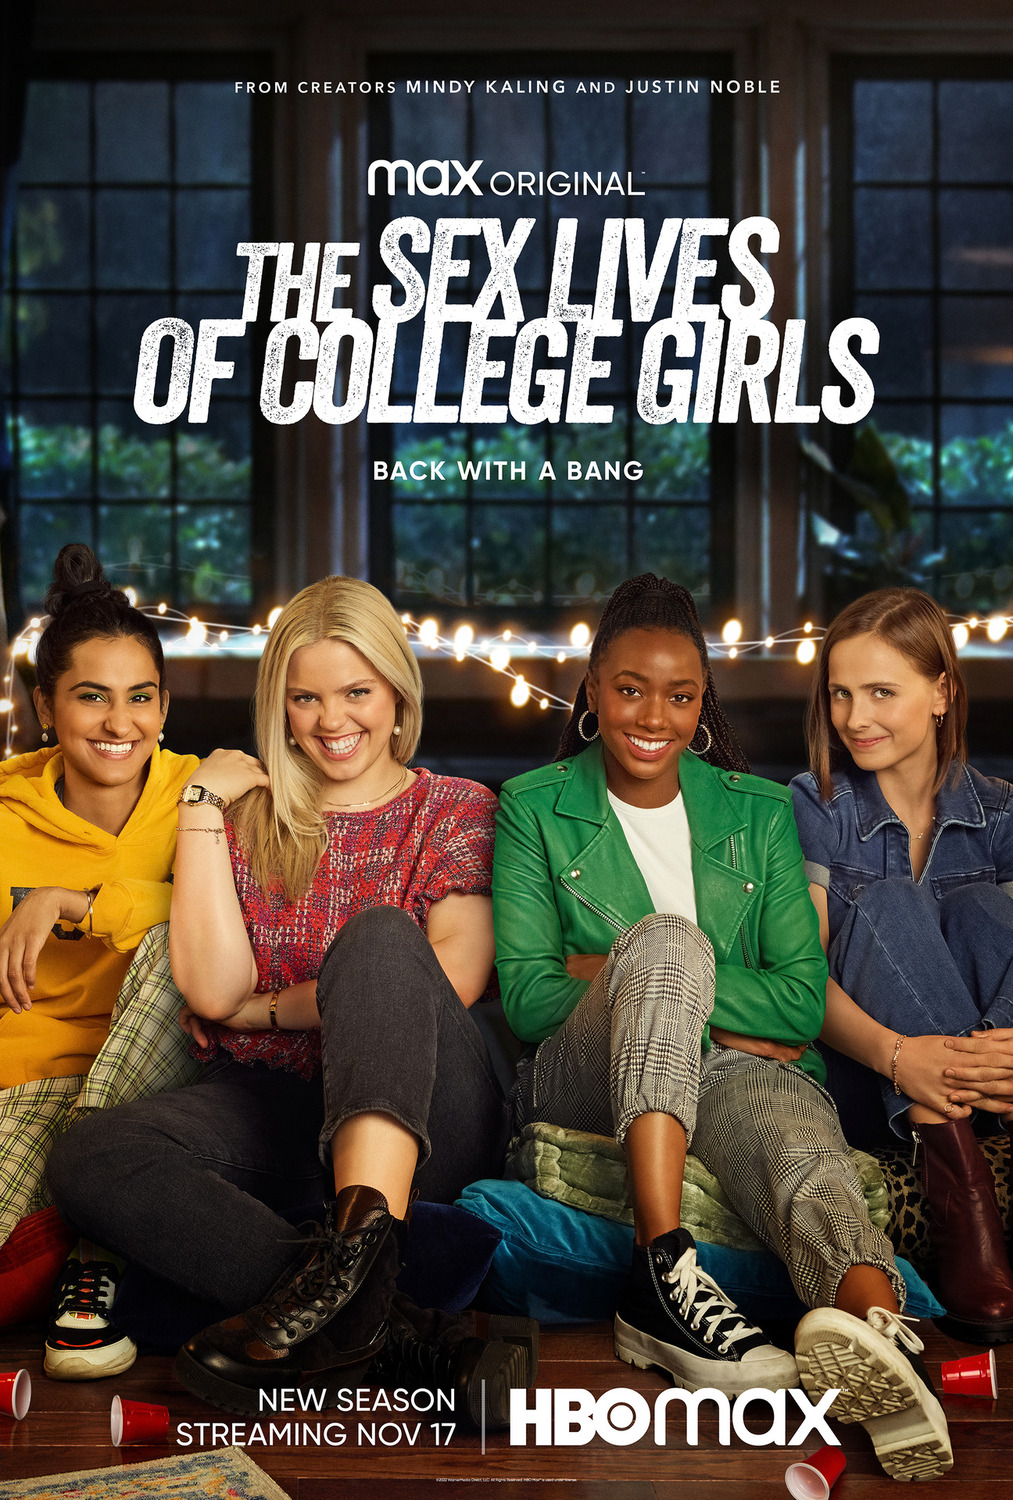 andriene augustine recommends College Girl Images